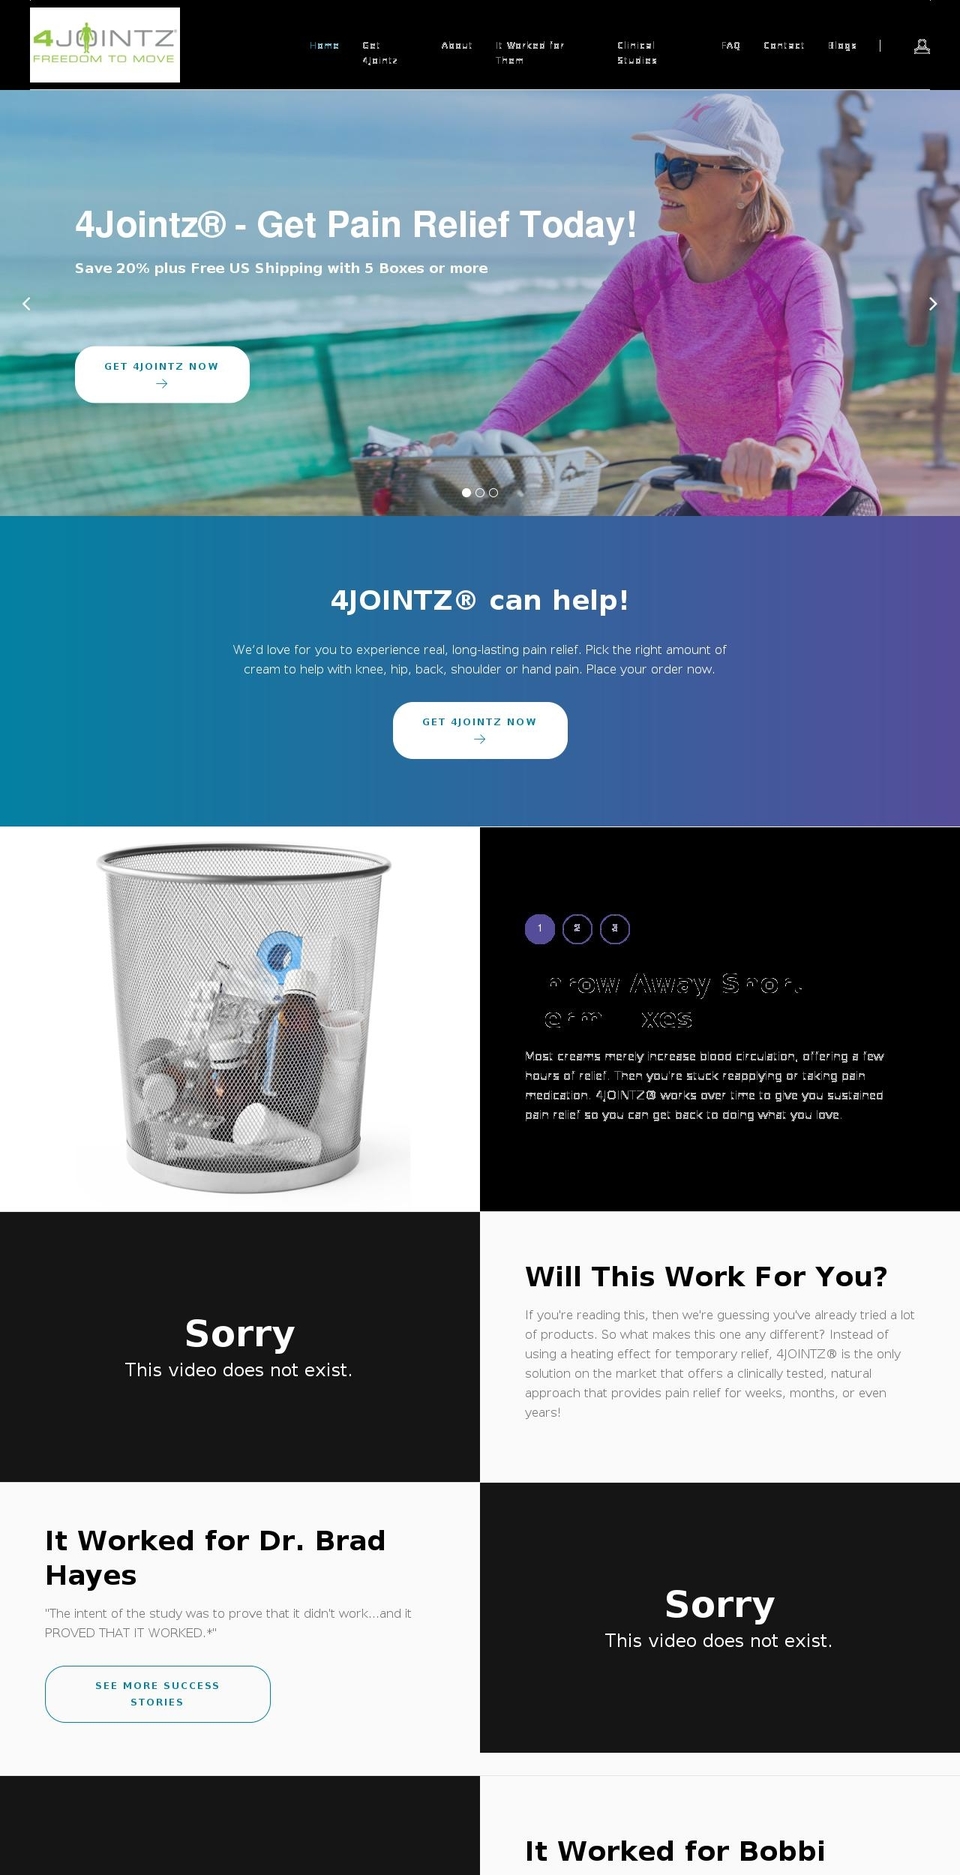 EcomSolid Shopify theme site example 4jointz.com